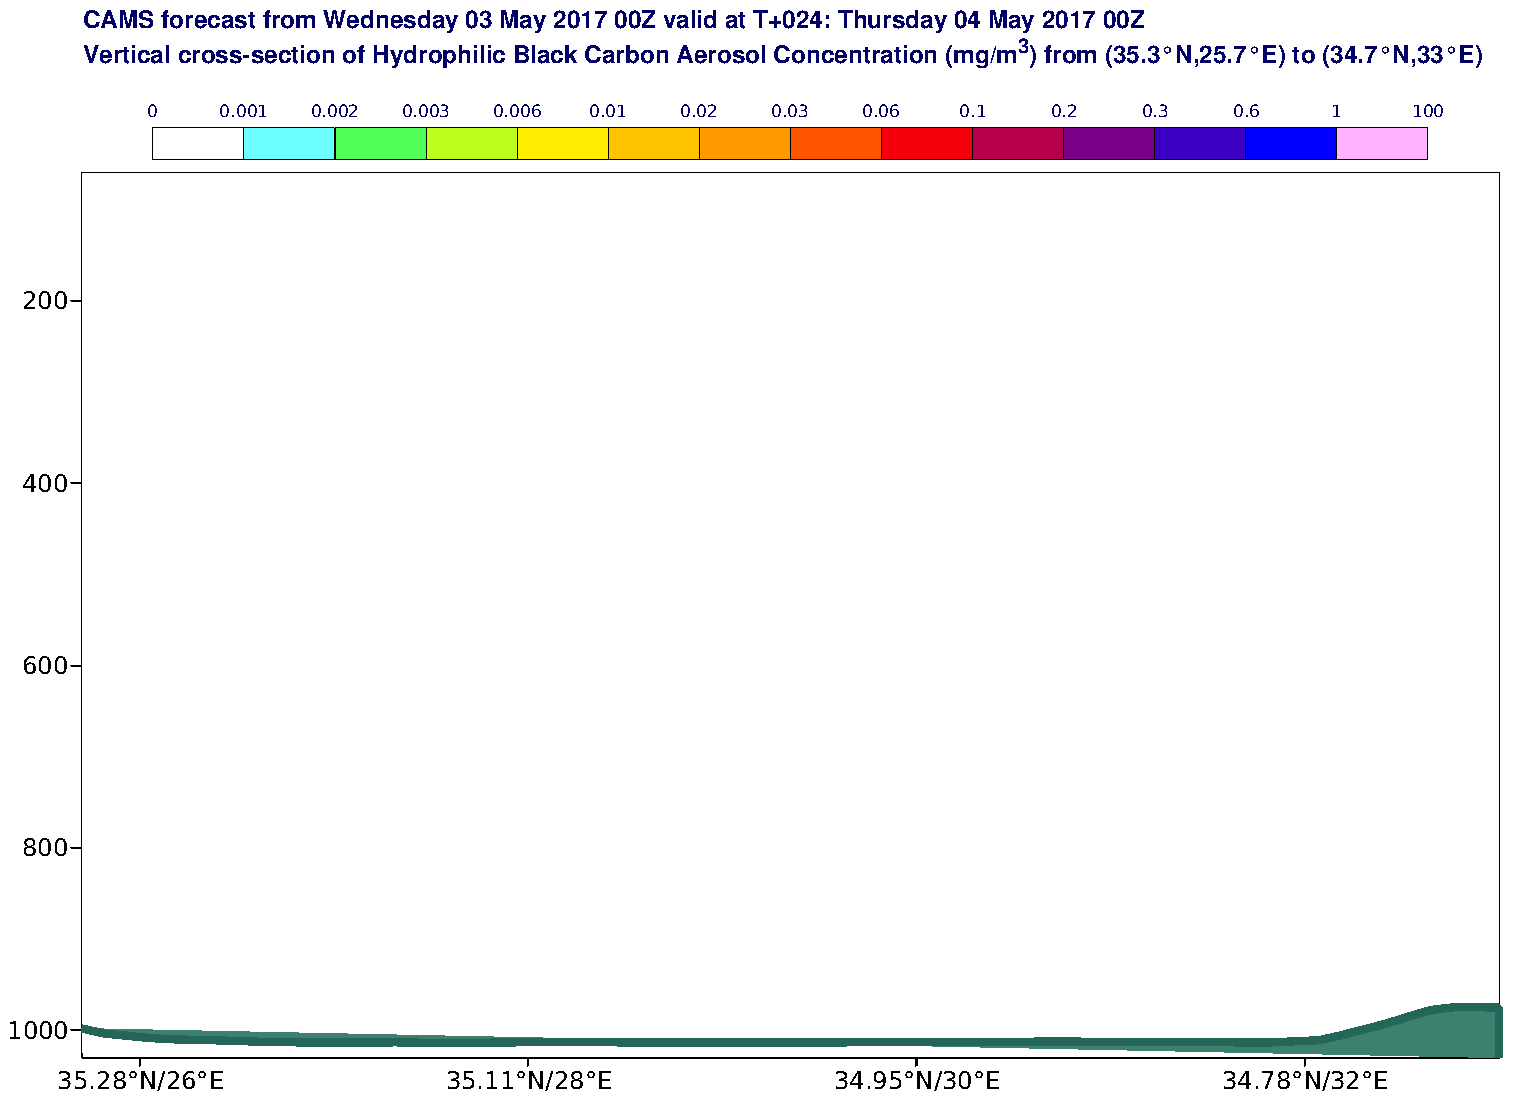 Vertical cross-section of Hydrophilic Black Carbon Aerosol Concentration (mg/m3) valid at T24 - 2017-05-04 00:00